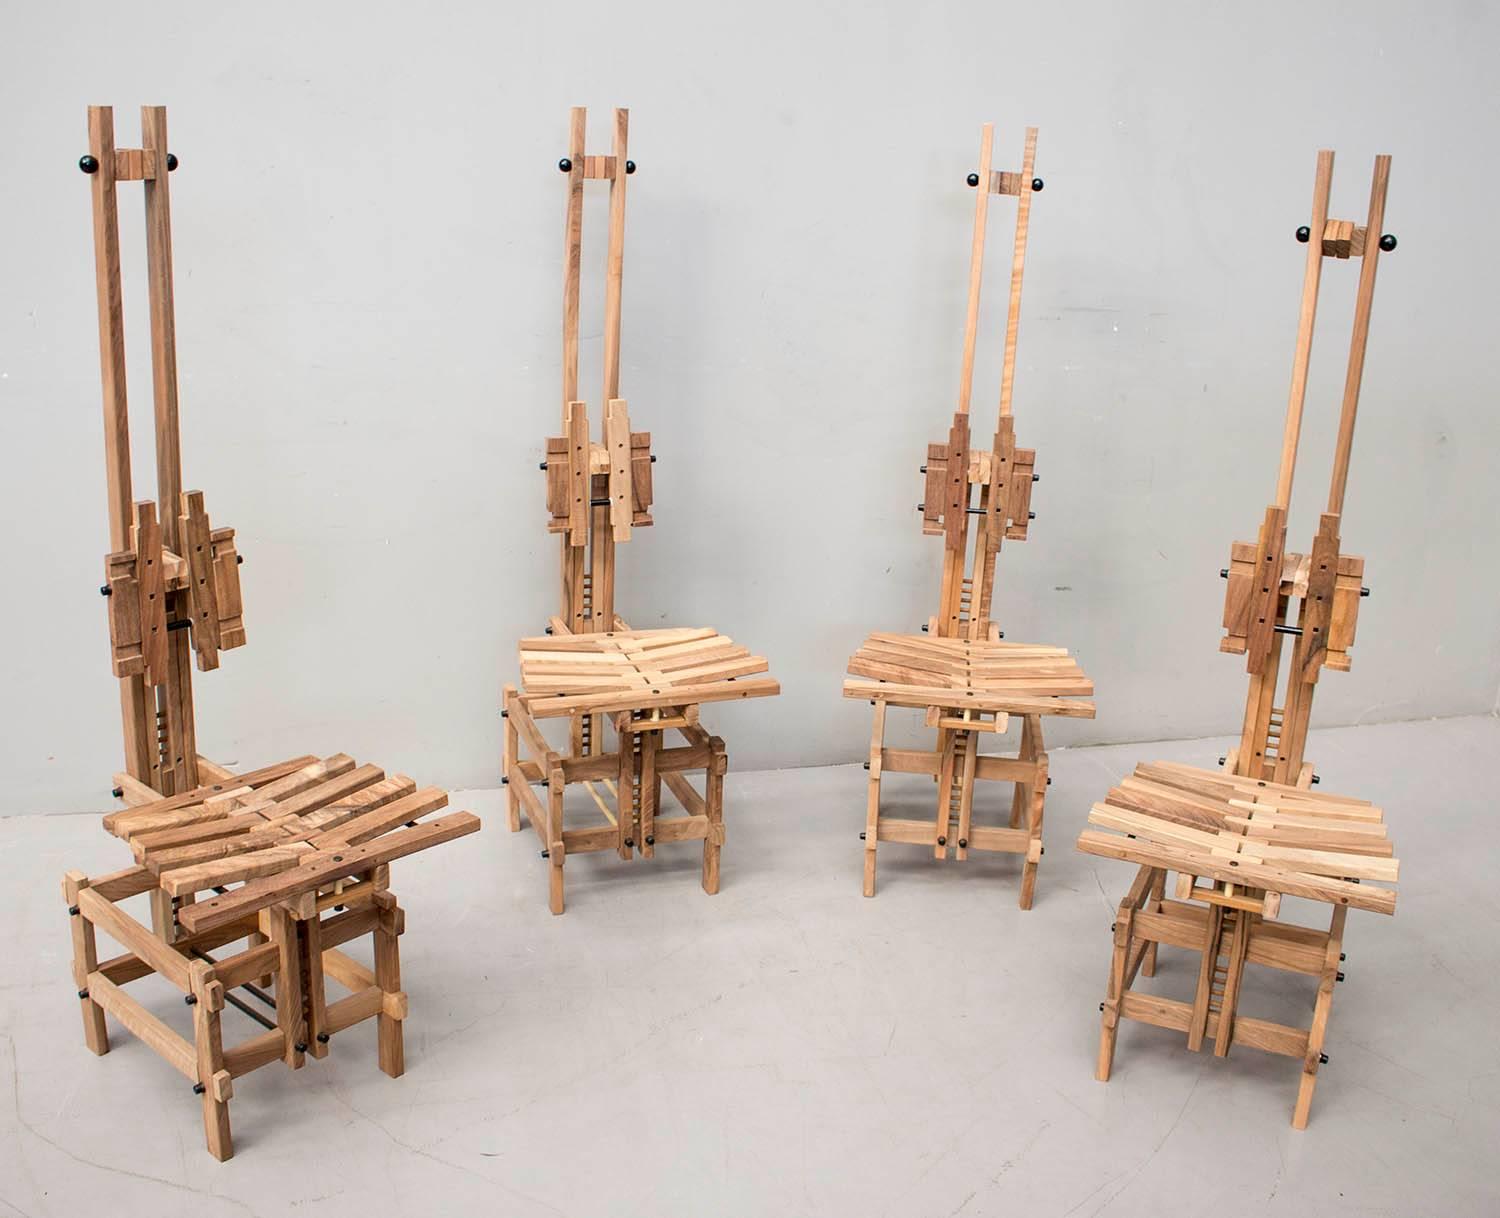 Modern Wooden Chairs by Anacleto Spazzapan 4 Sedie 